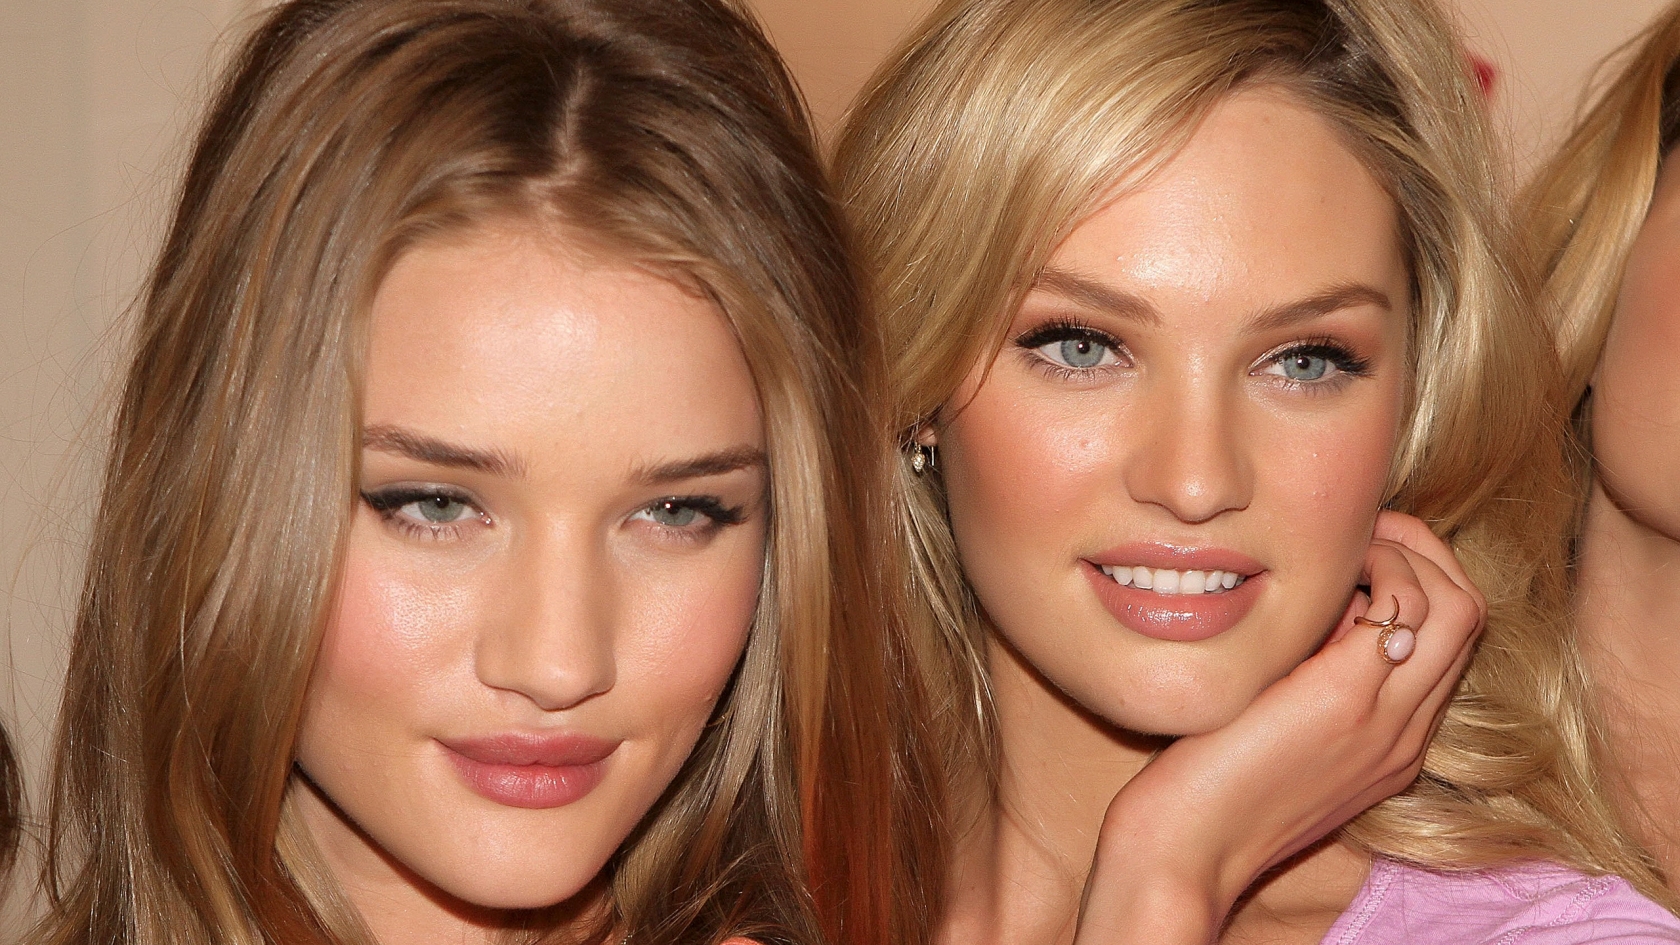 Rosie and Candice for 1680 x 945 HDTV resolution